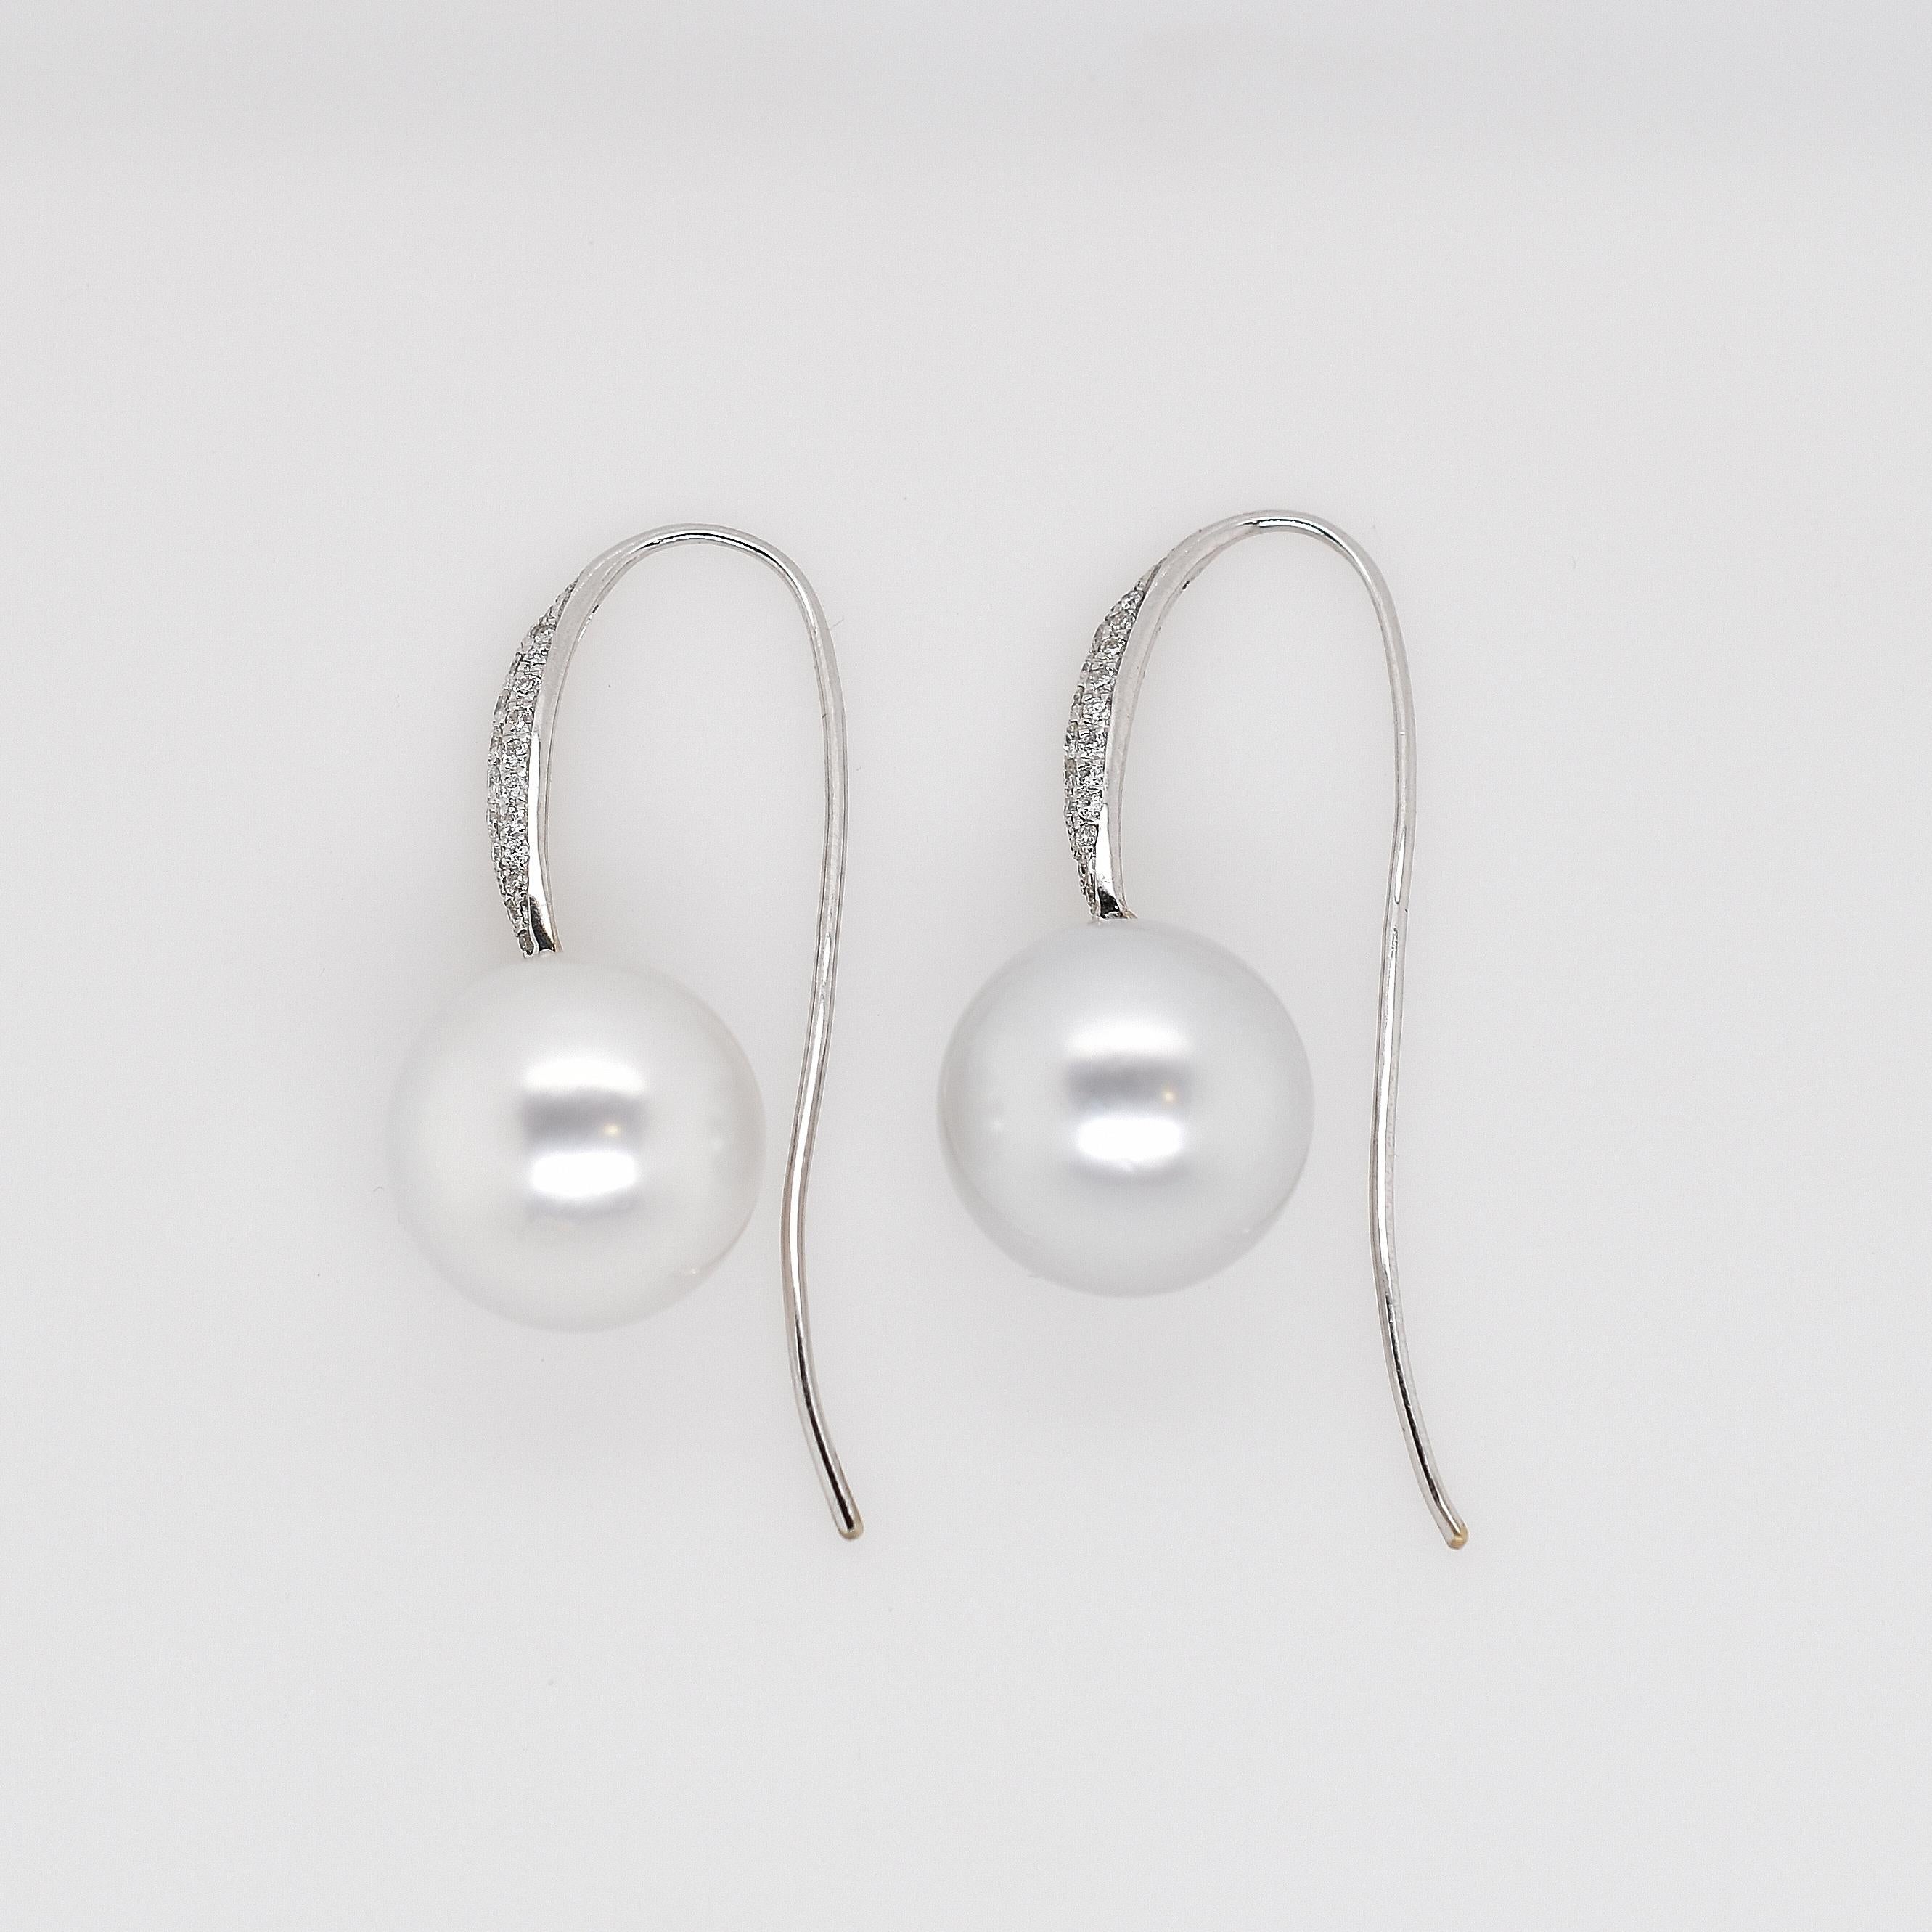 18ct white gold south sea pearl and pavé diamond drop earrings. Two 15.4mm white fine lustre south sea pearls on pavé set diamond long drop hooks. 12 round brilliant cut diamonds totalling 0.18ct and 44 round brilliant cut diamonds totalling 0.50ct